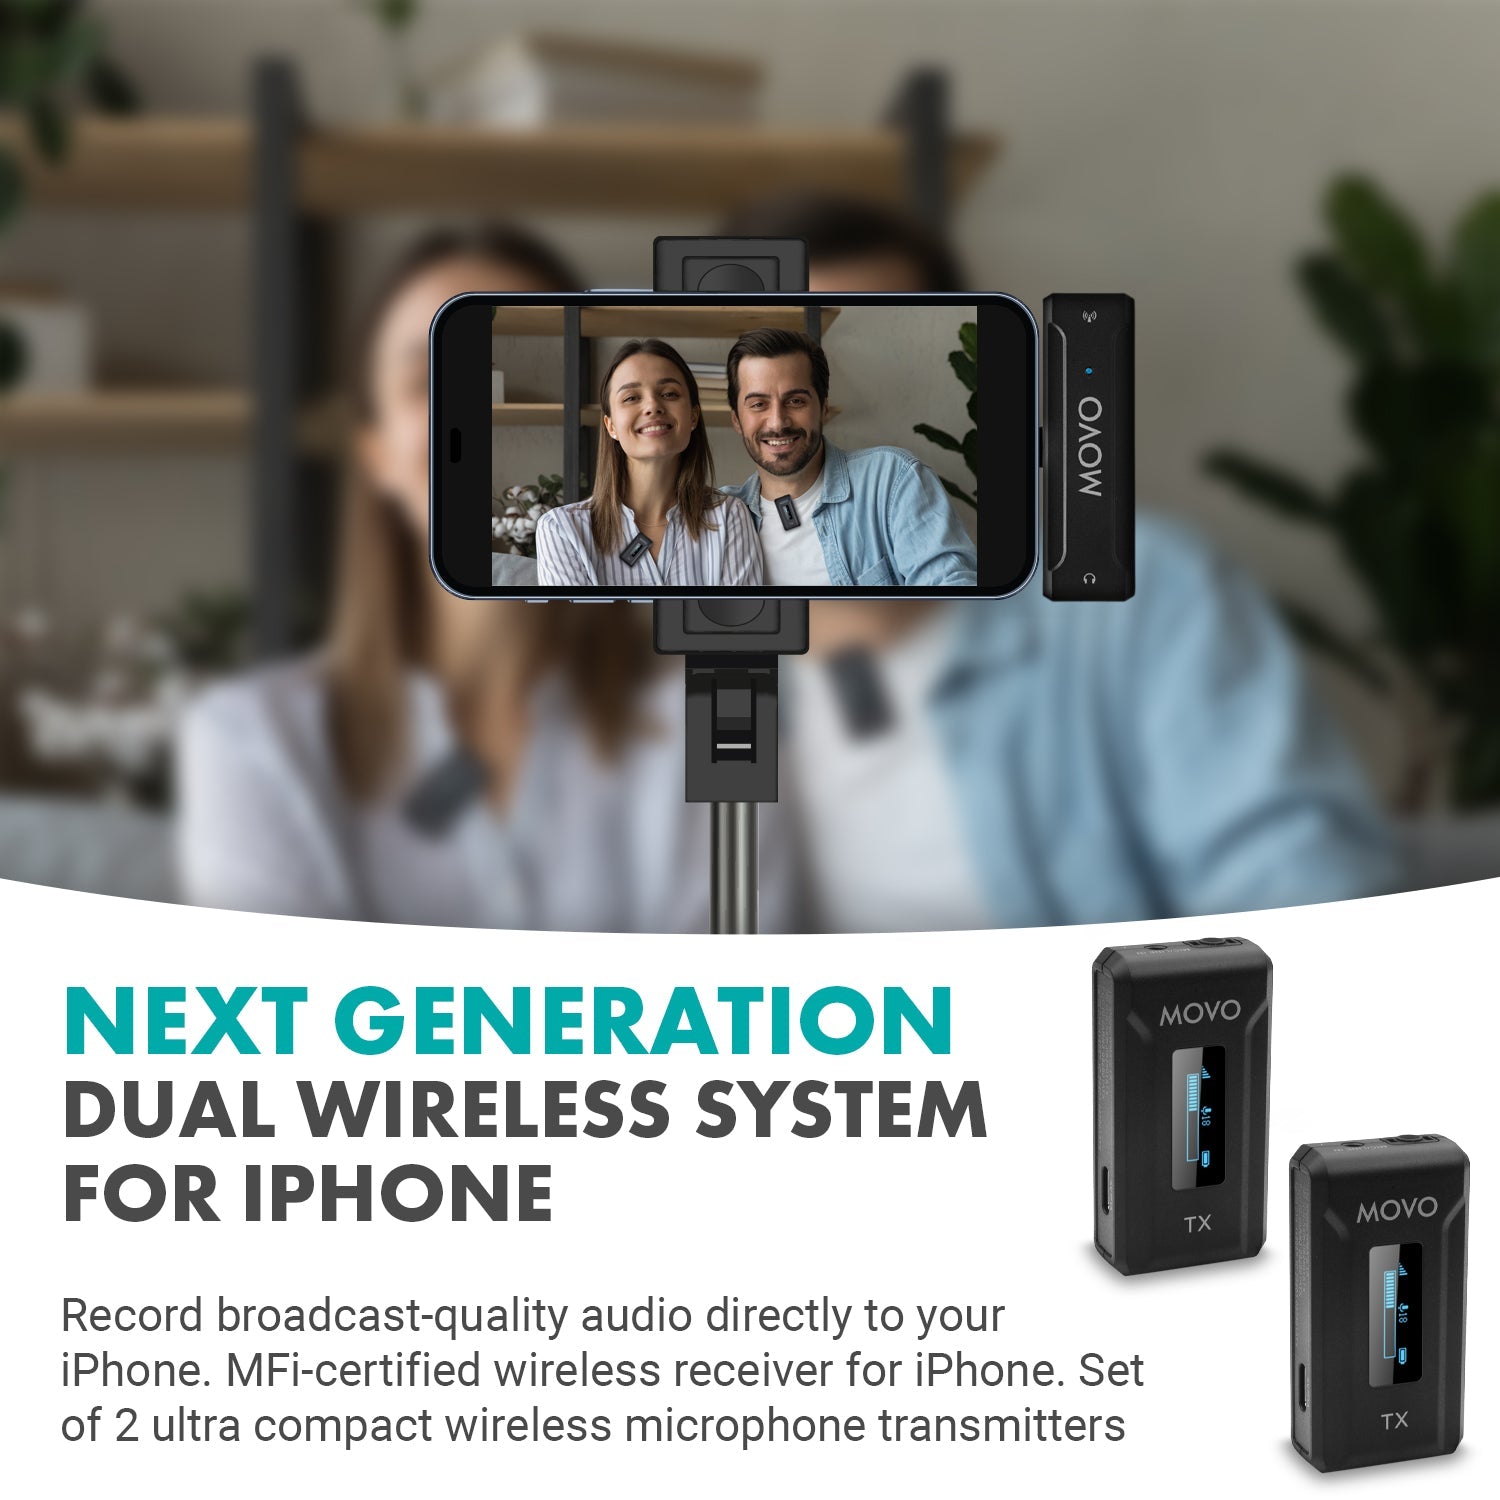 WMX-2-DUO  Dual Wireless Lav Mic System with Charging Case